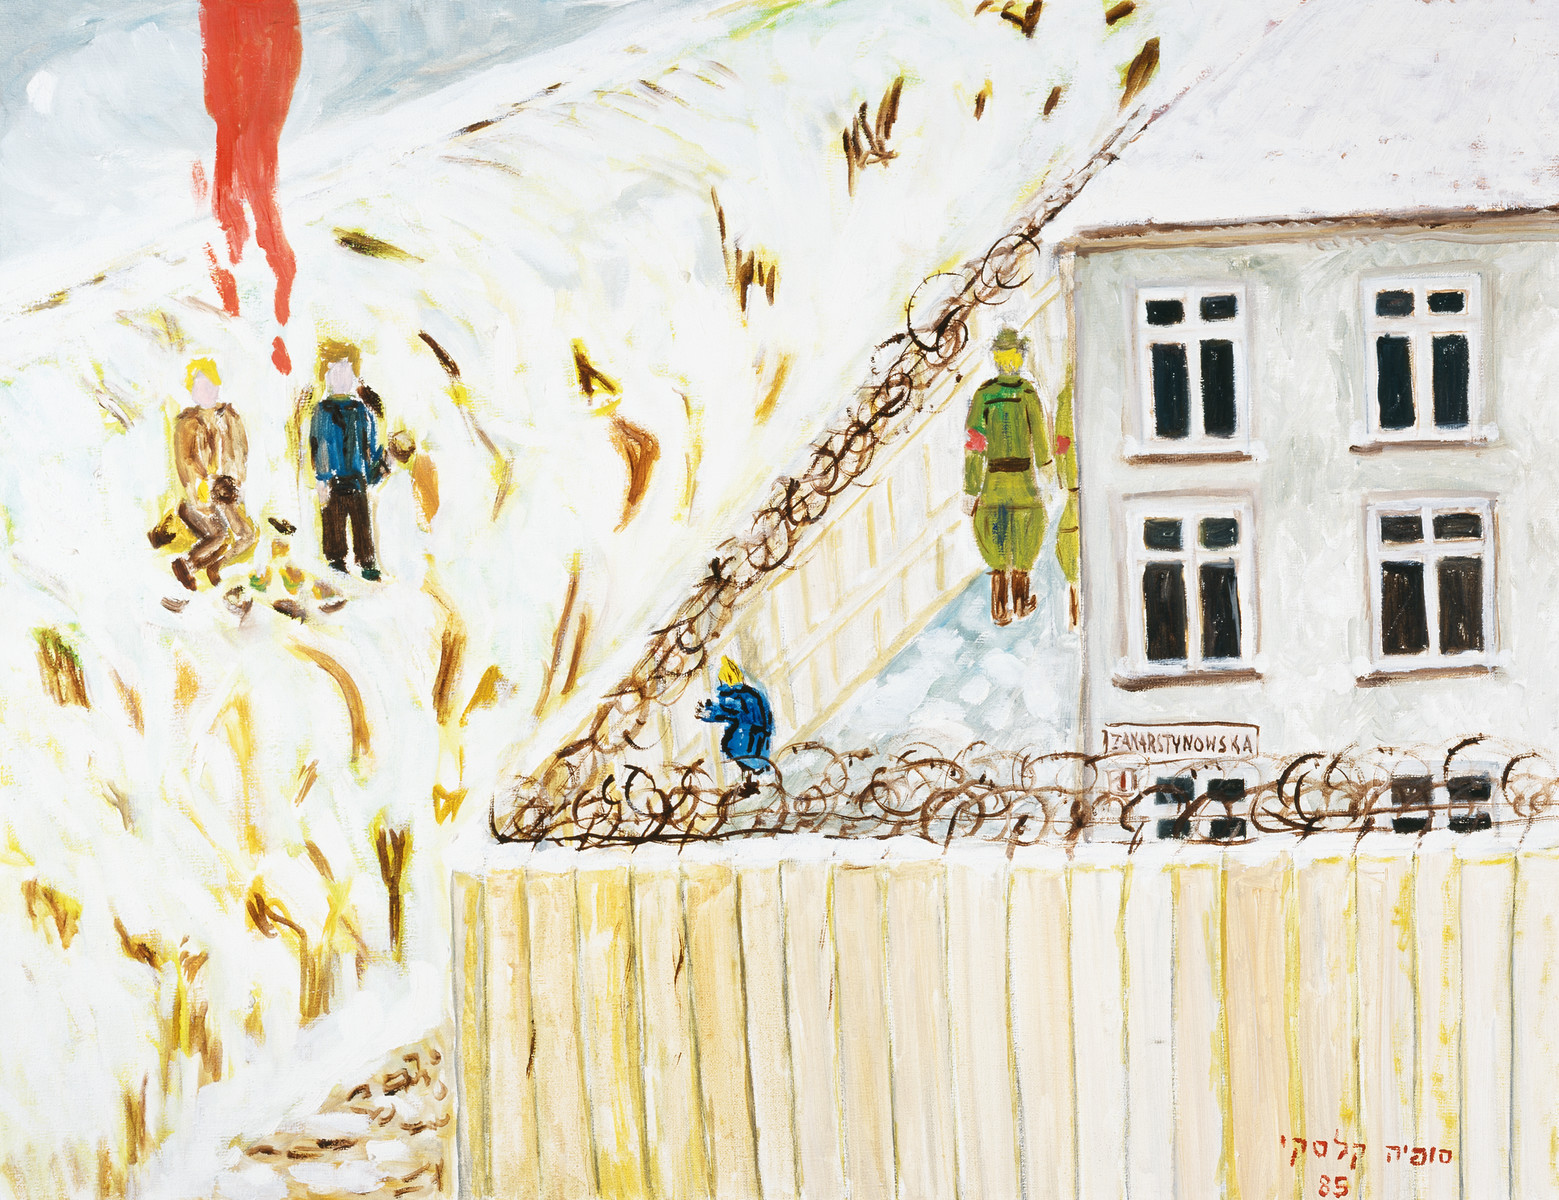 A painting by artist Sophia Kalski entitled "Escape from Lwow ghetto, end of March 1943. Zamarstynowska #1."  

The artist writes about the image, "The Germans are in the street and I'm running. I was told that through the fourth post in the fence I will be able to leave. I reached the fence, I counted four posts. In the moment the German turned his back, I discovered the hole in the fence and with the speed of lightening, I passed through this hole to the other side. the Aryan side. One minute of fear, that will bring life or death. Polish children discovered me and started to yell "Jewess!" and throw stones at me. I managed to avoid them, to run away, and to cross the street."